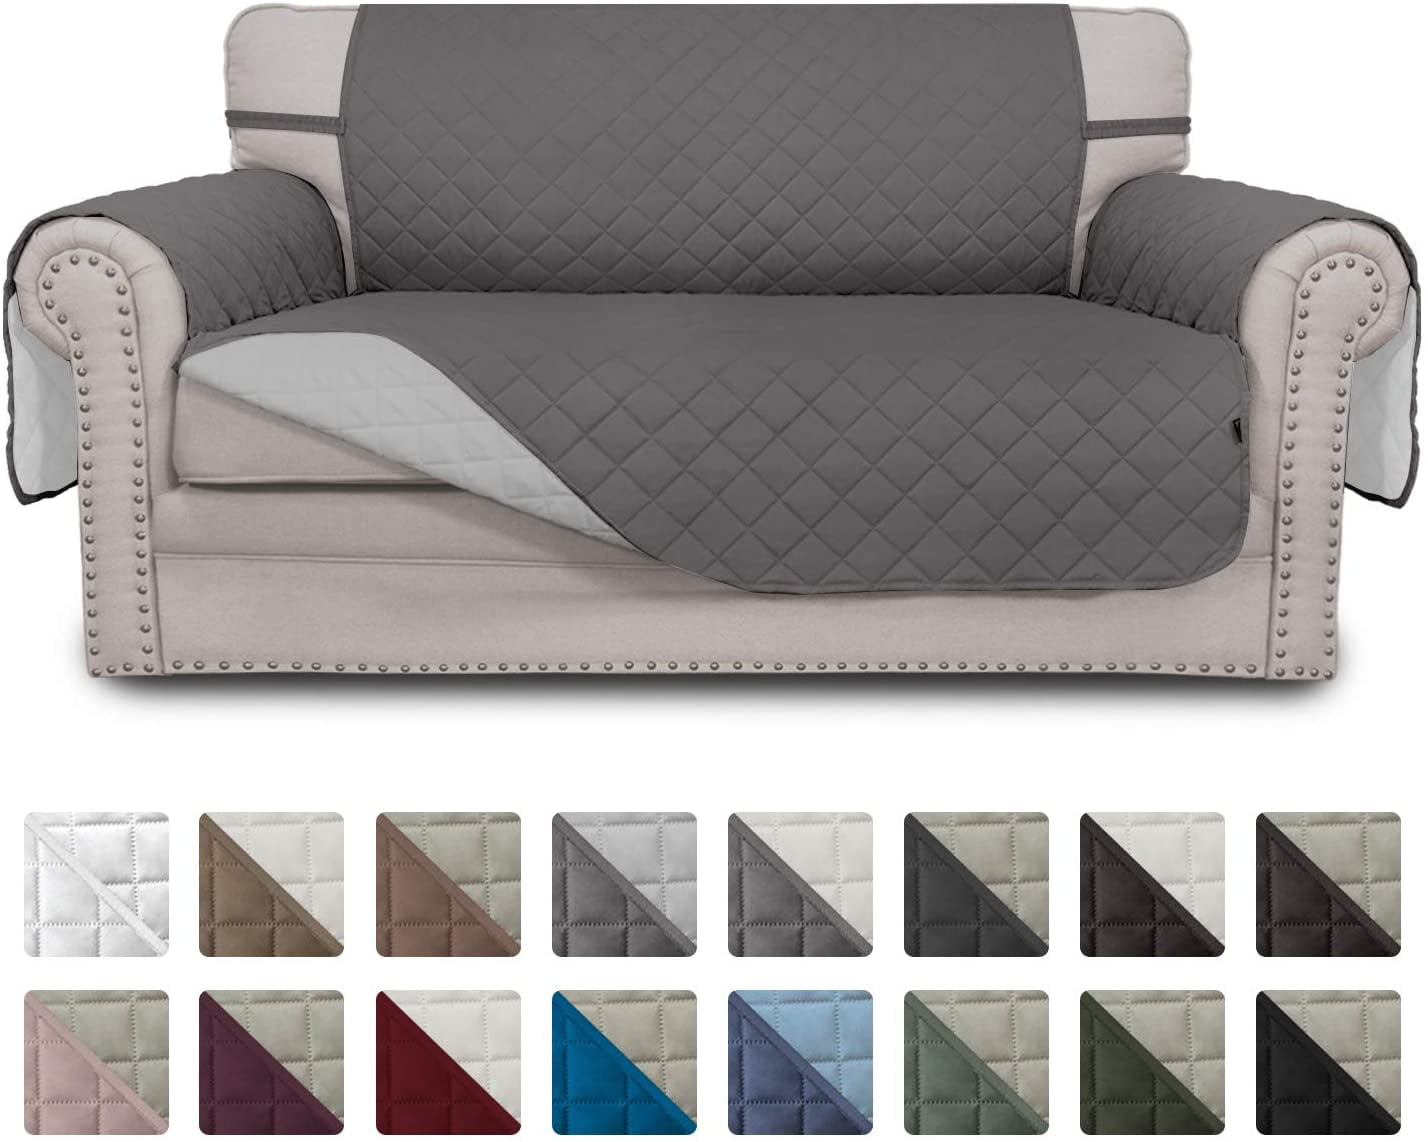 washable cover for leather sofa